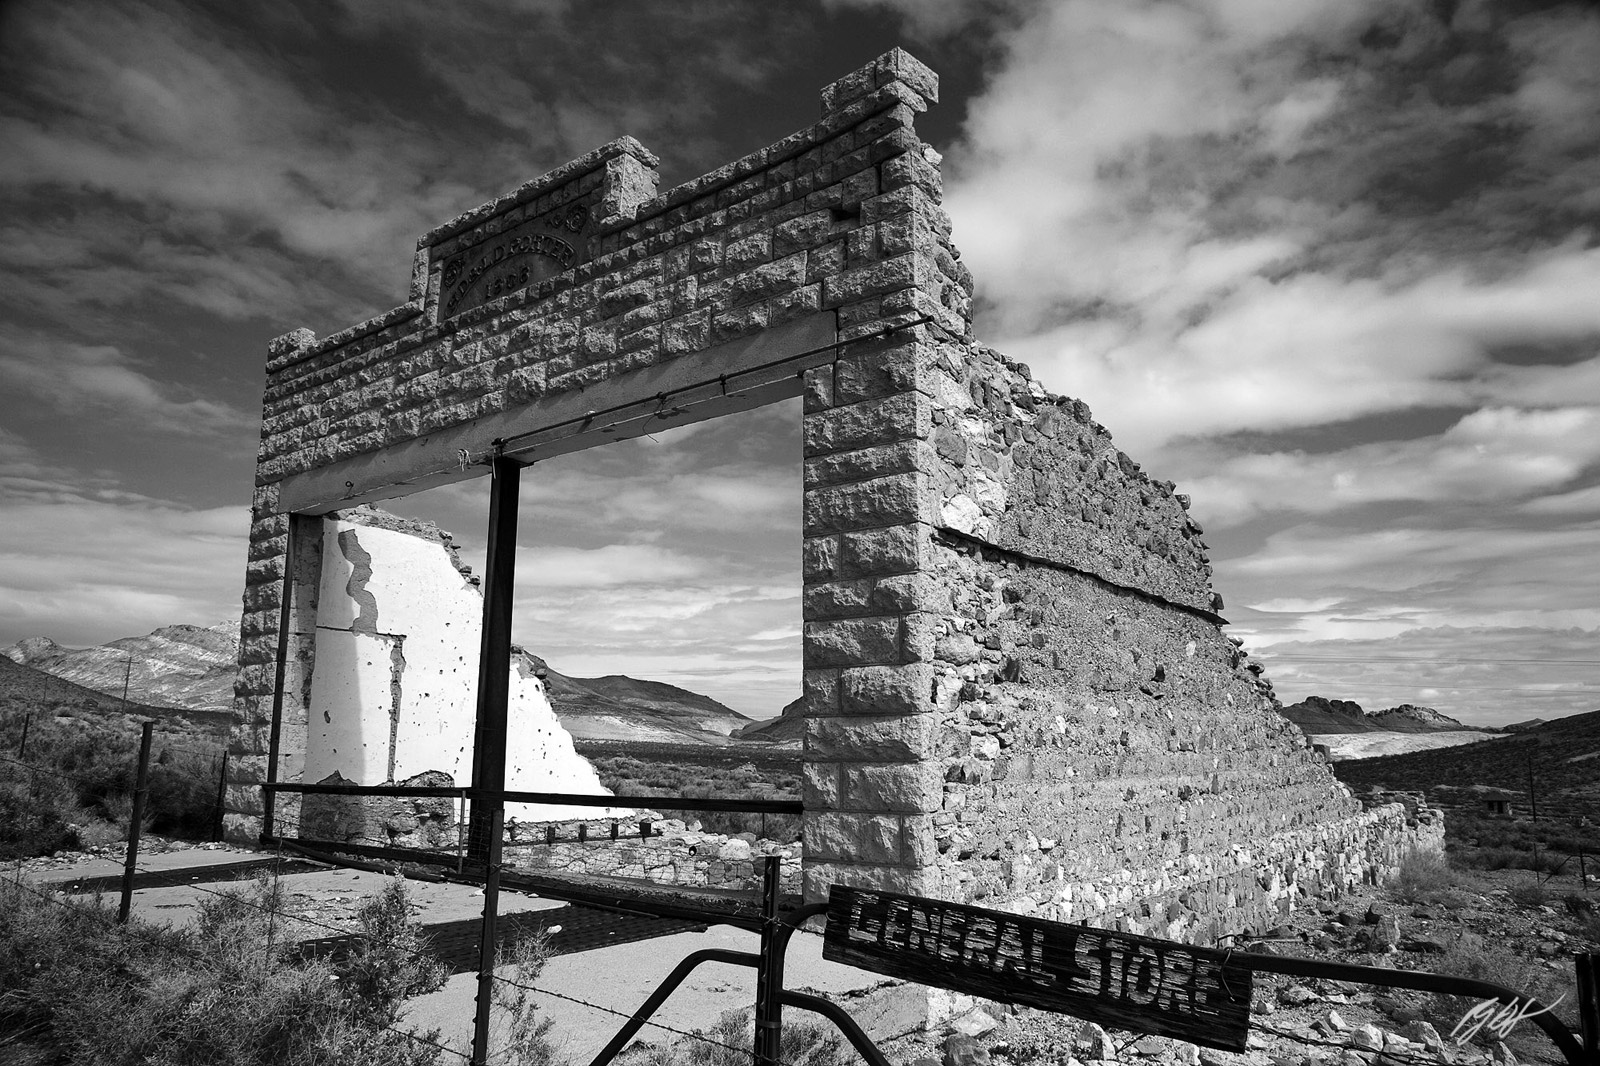 The General Store Ruins in Rhyolite Ghost Town near Beatty Nevada